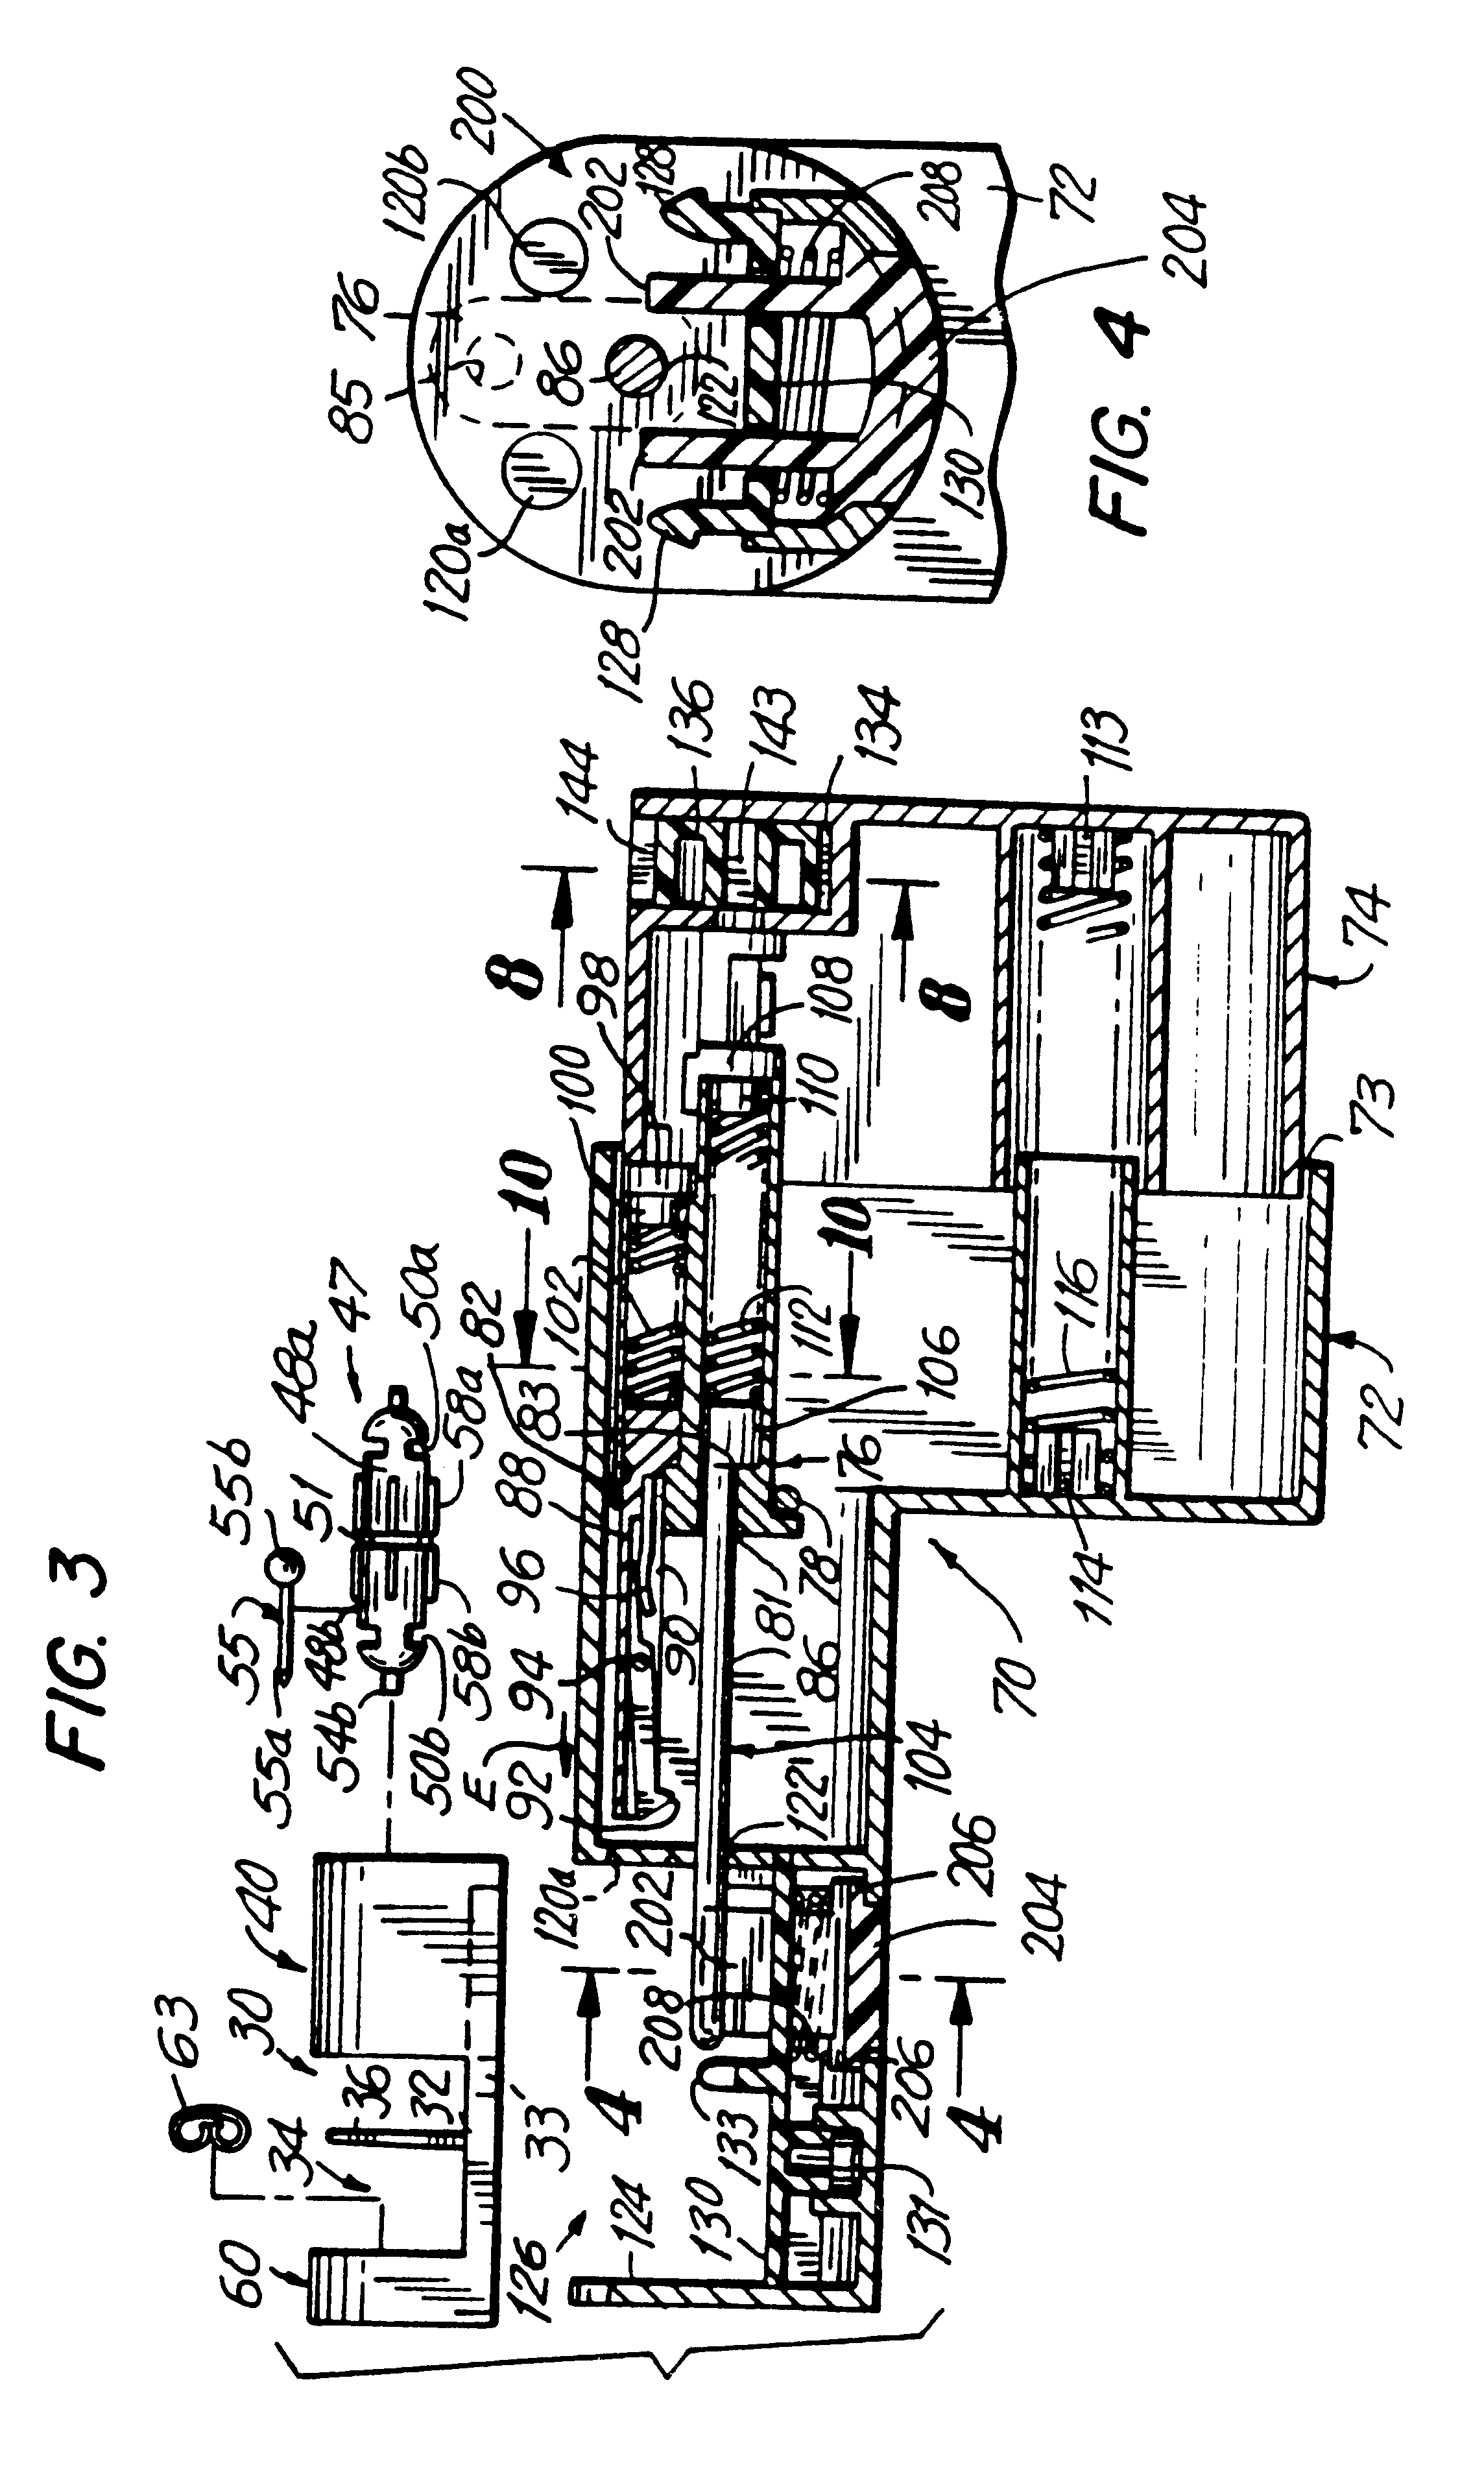 Integrated disposable ear piercing earring and clutch cartridge and ear piercing instrument for use therewith